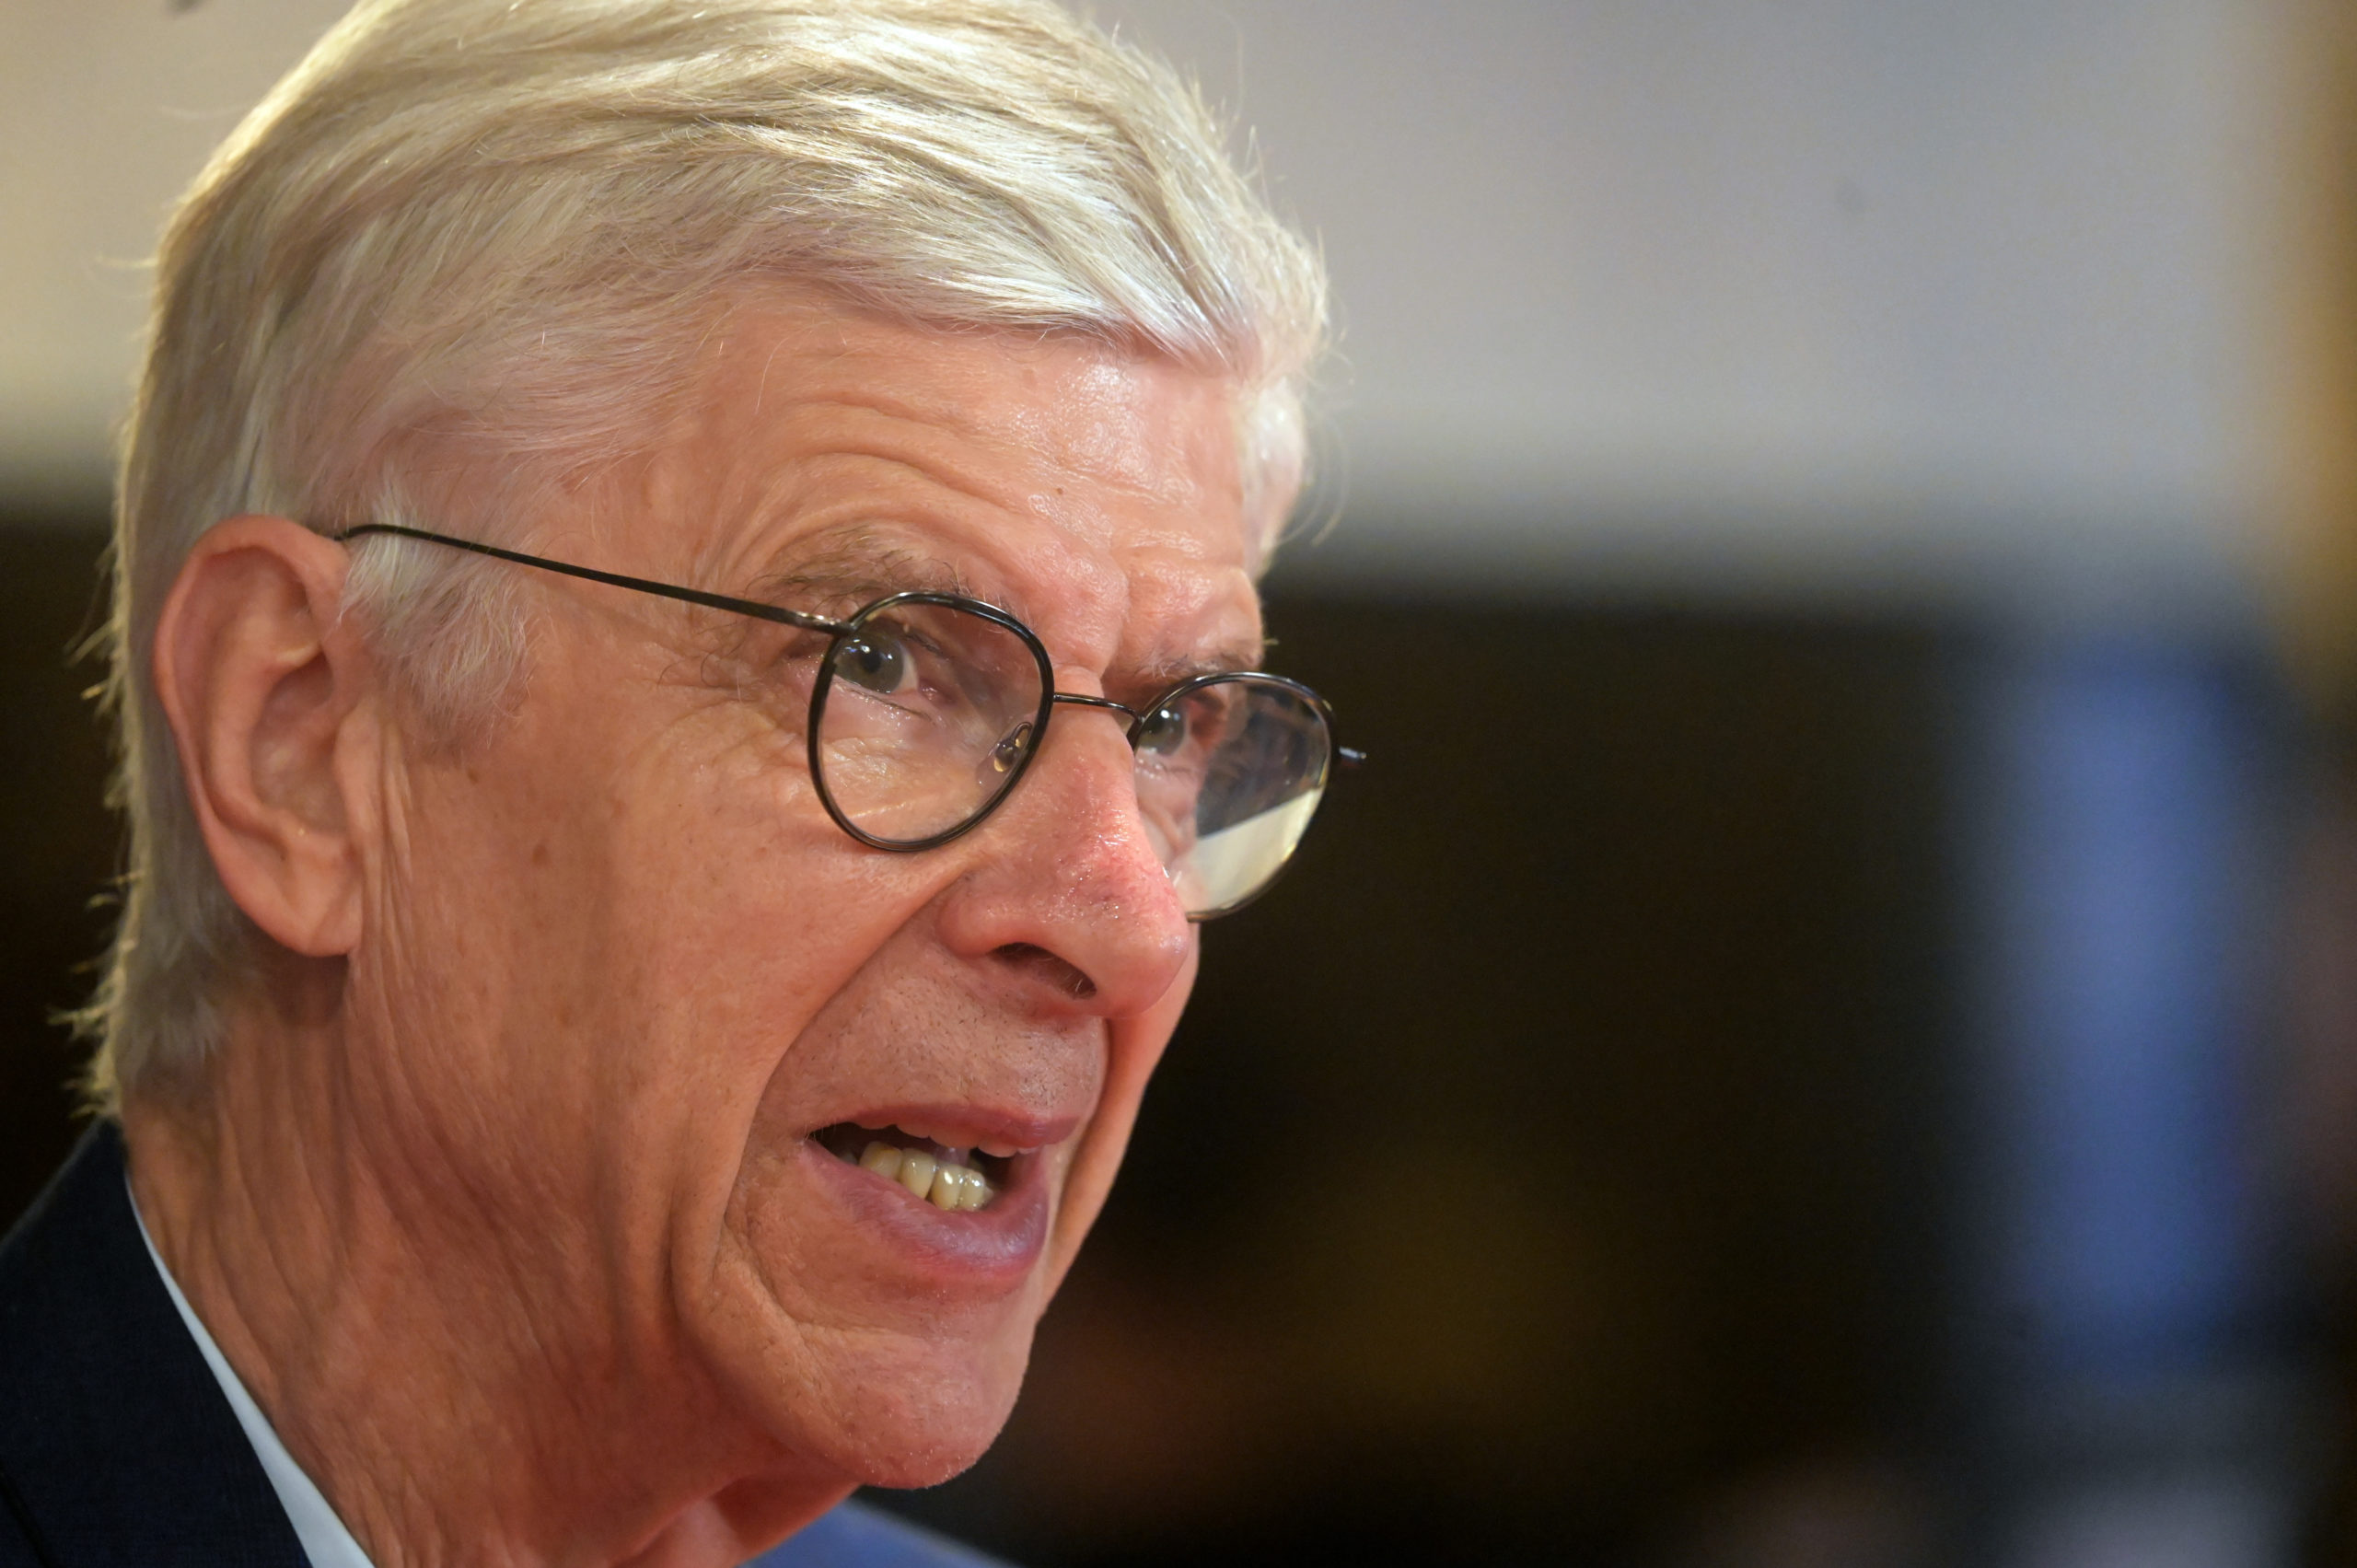 Arsene Wenger says Chelsea have one player with rare quality